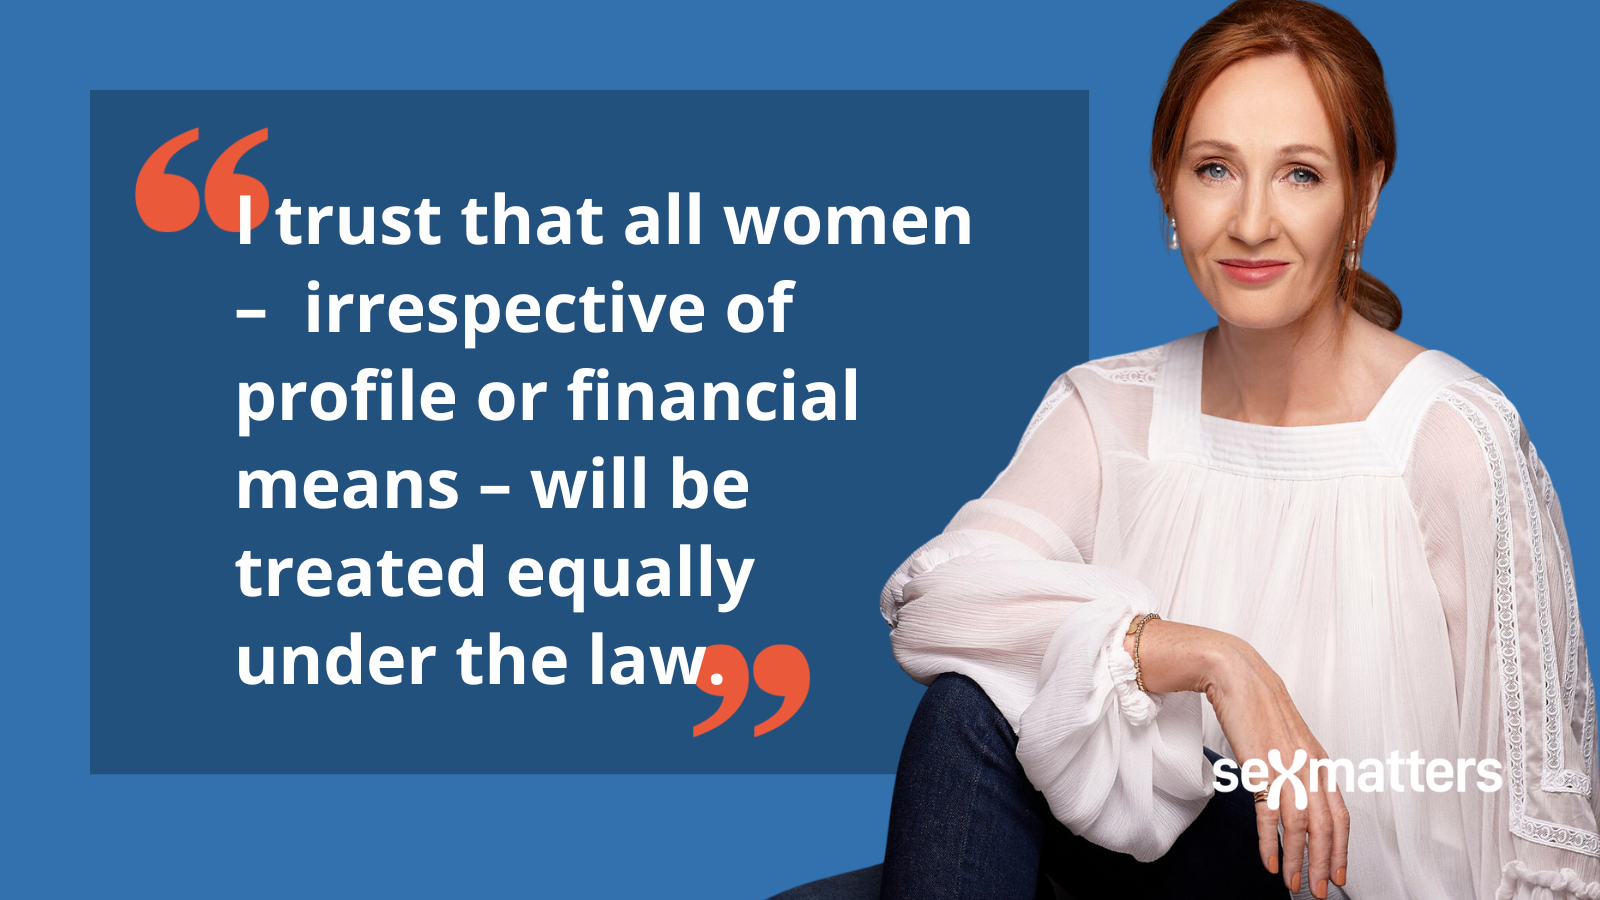 I trust that all women – irrespective of profile or financial means – will be treated equally under the law.